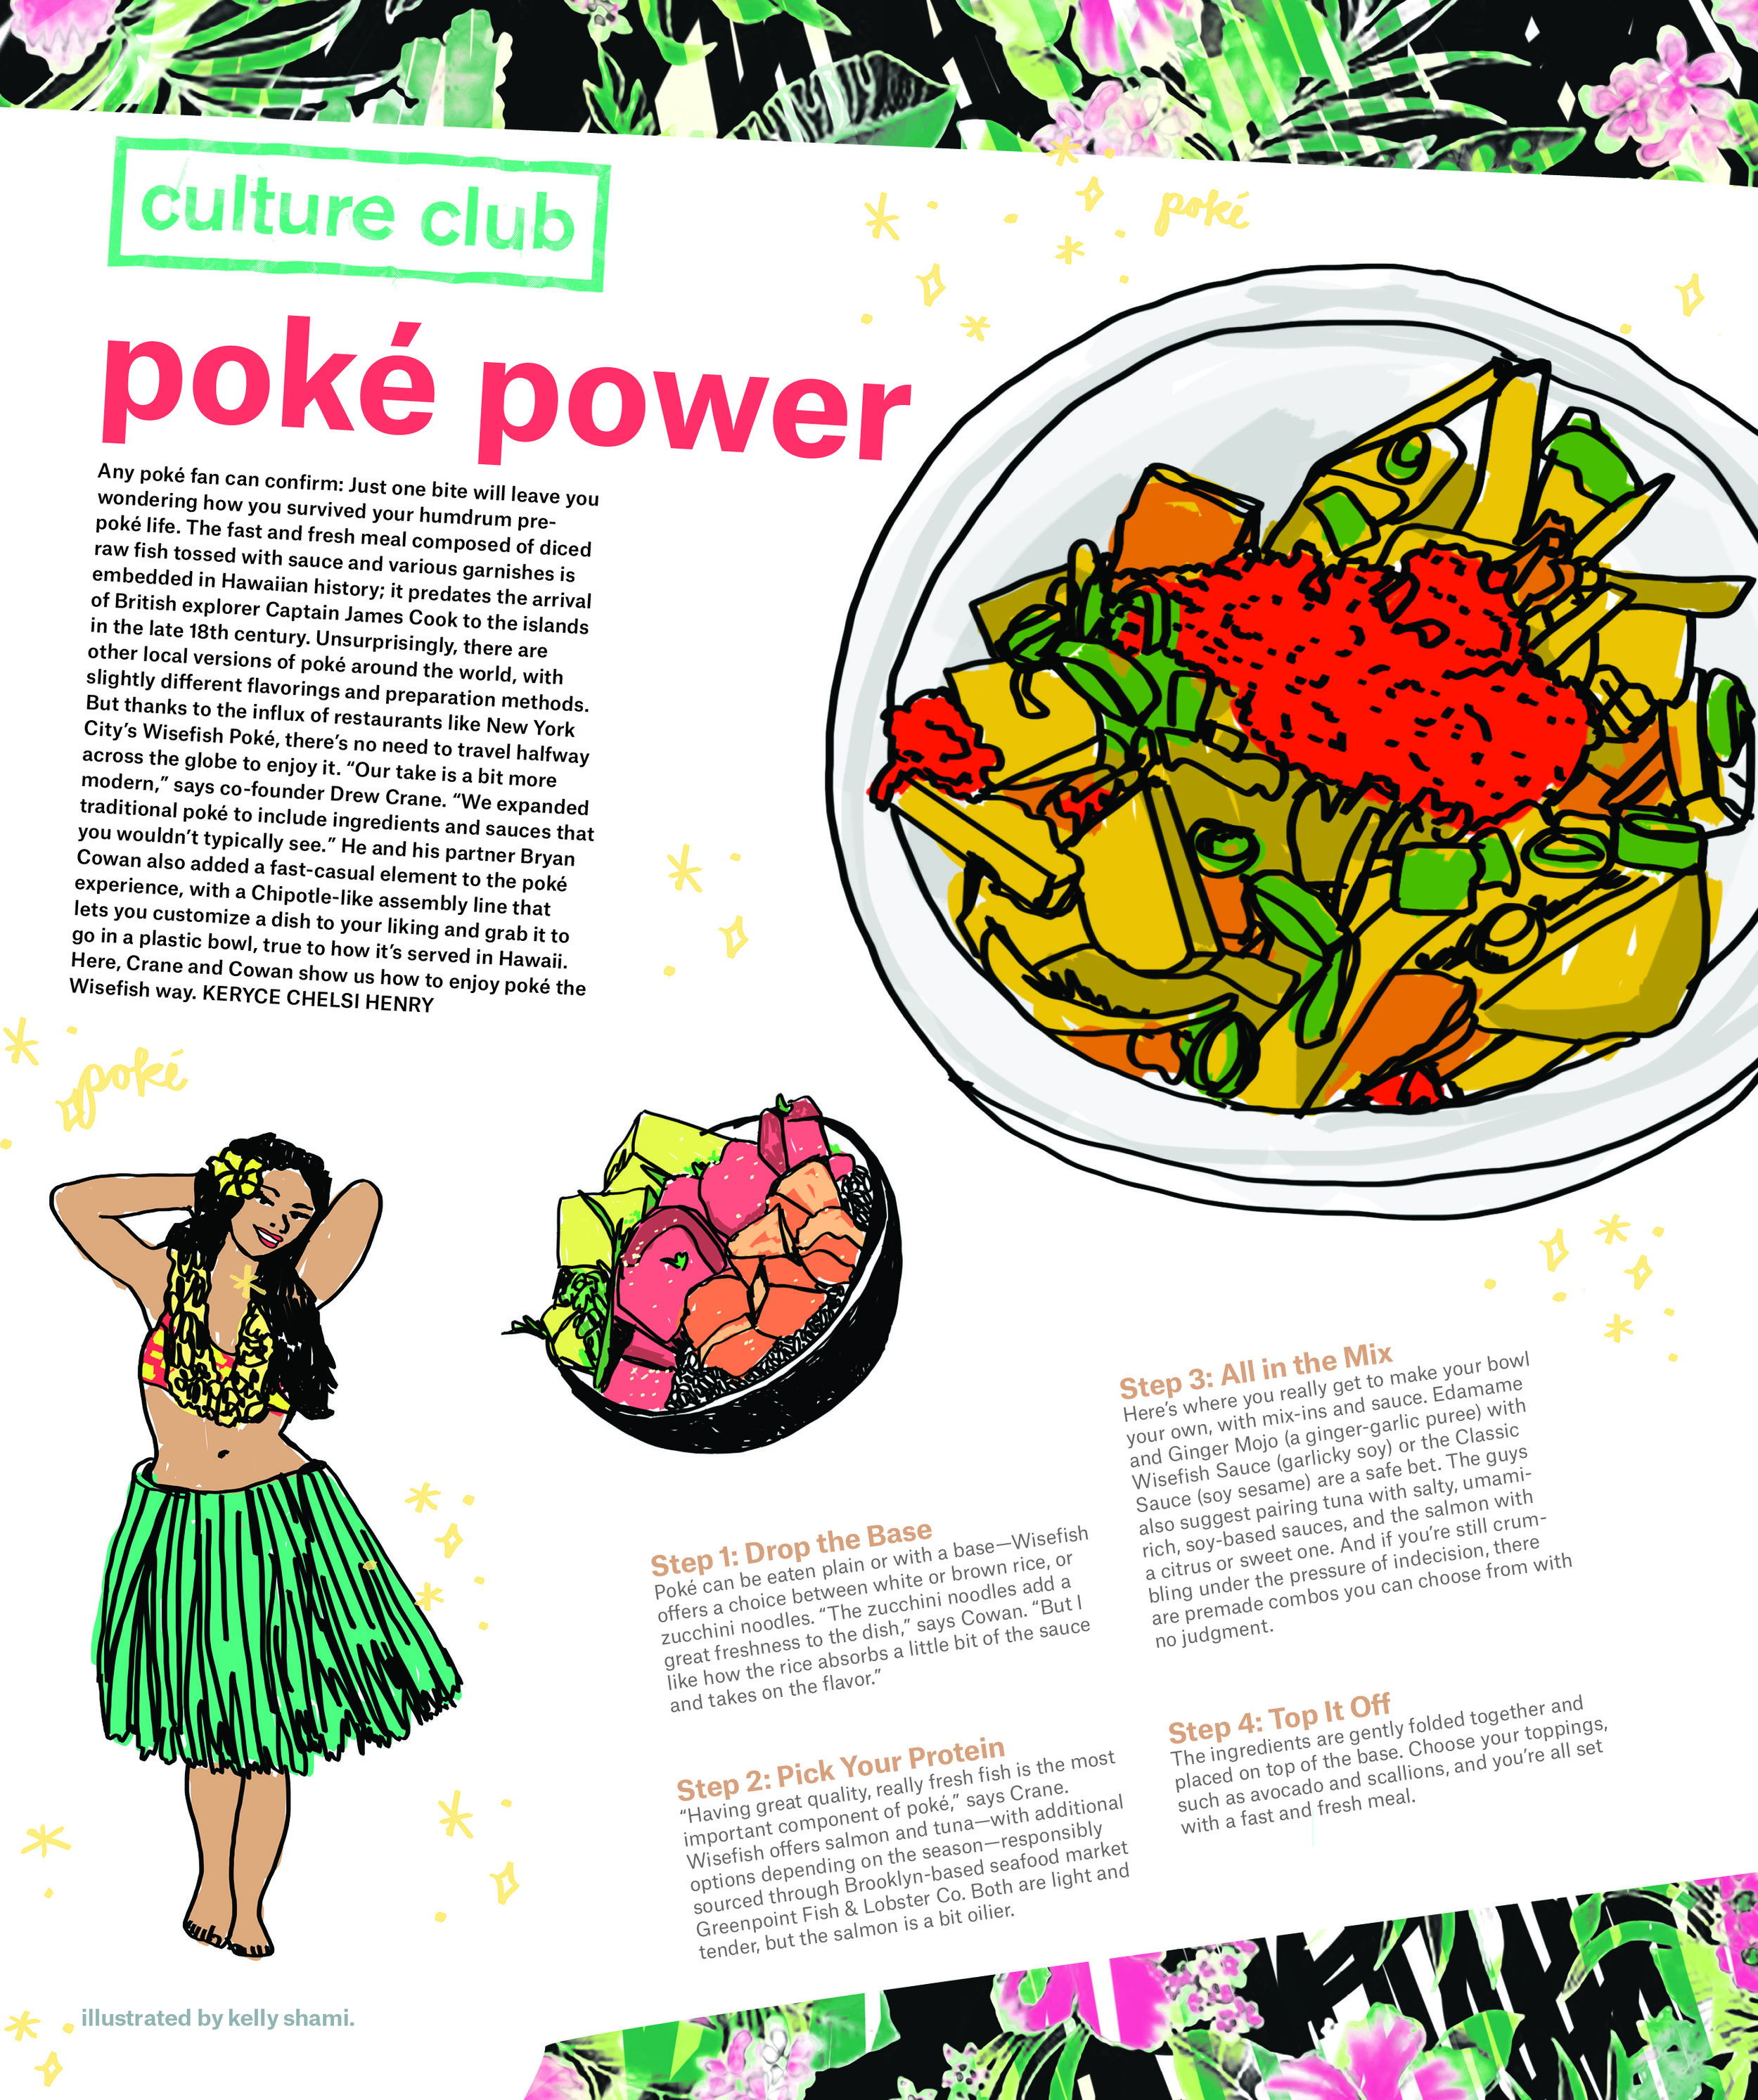  Interview with Wisefish Poké restaurant owners ( NYLON  April 2016. Illustrated by Kelly Shami.) 